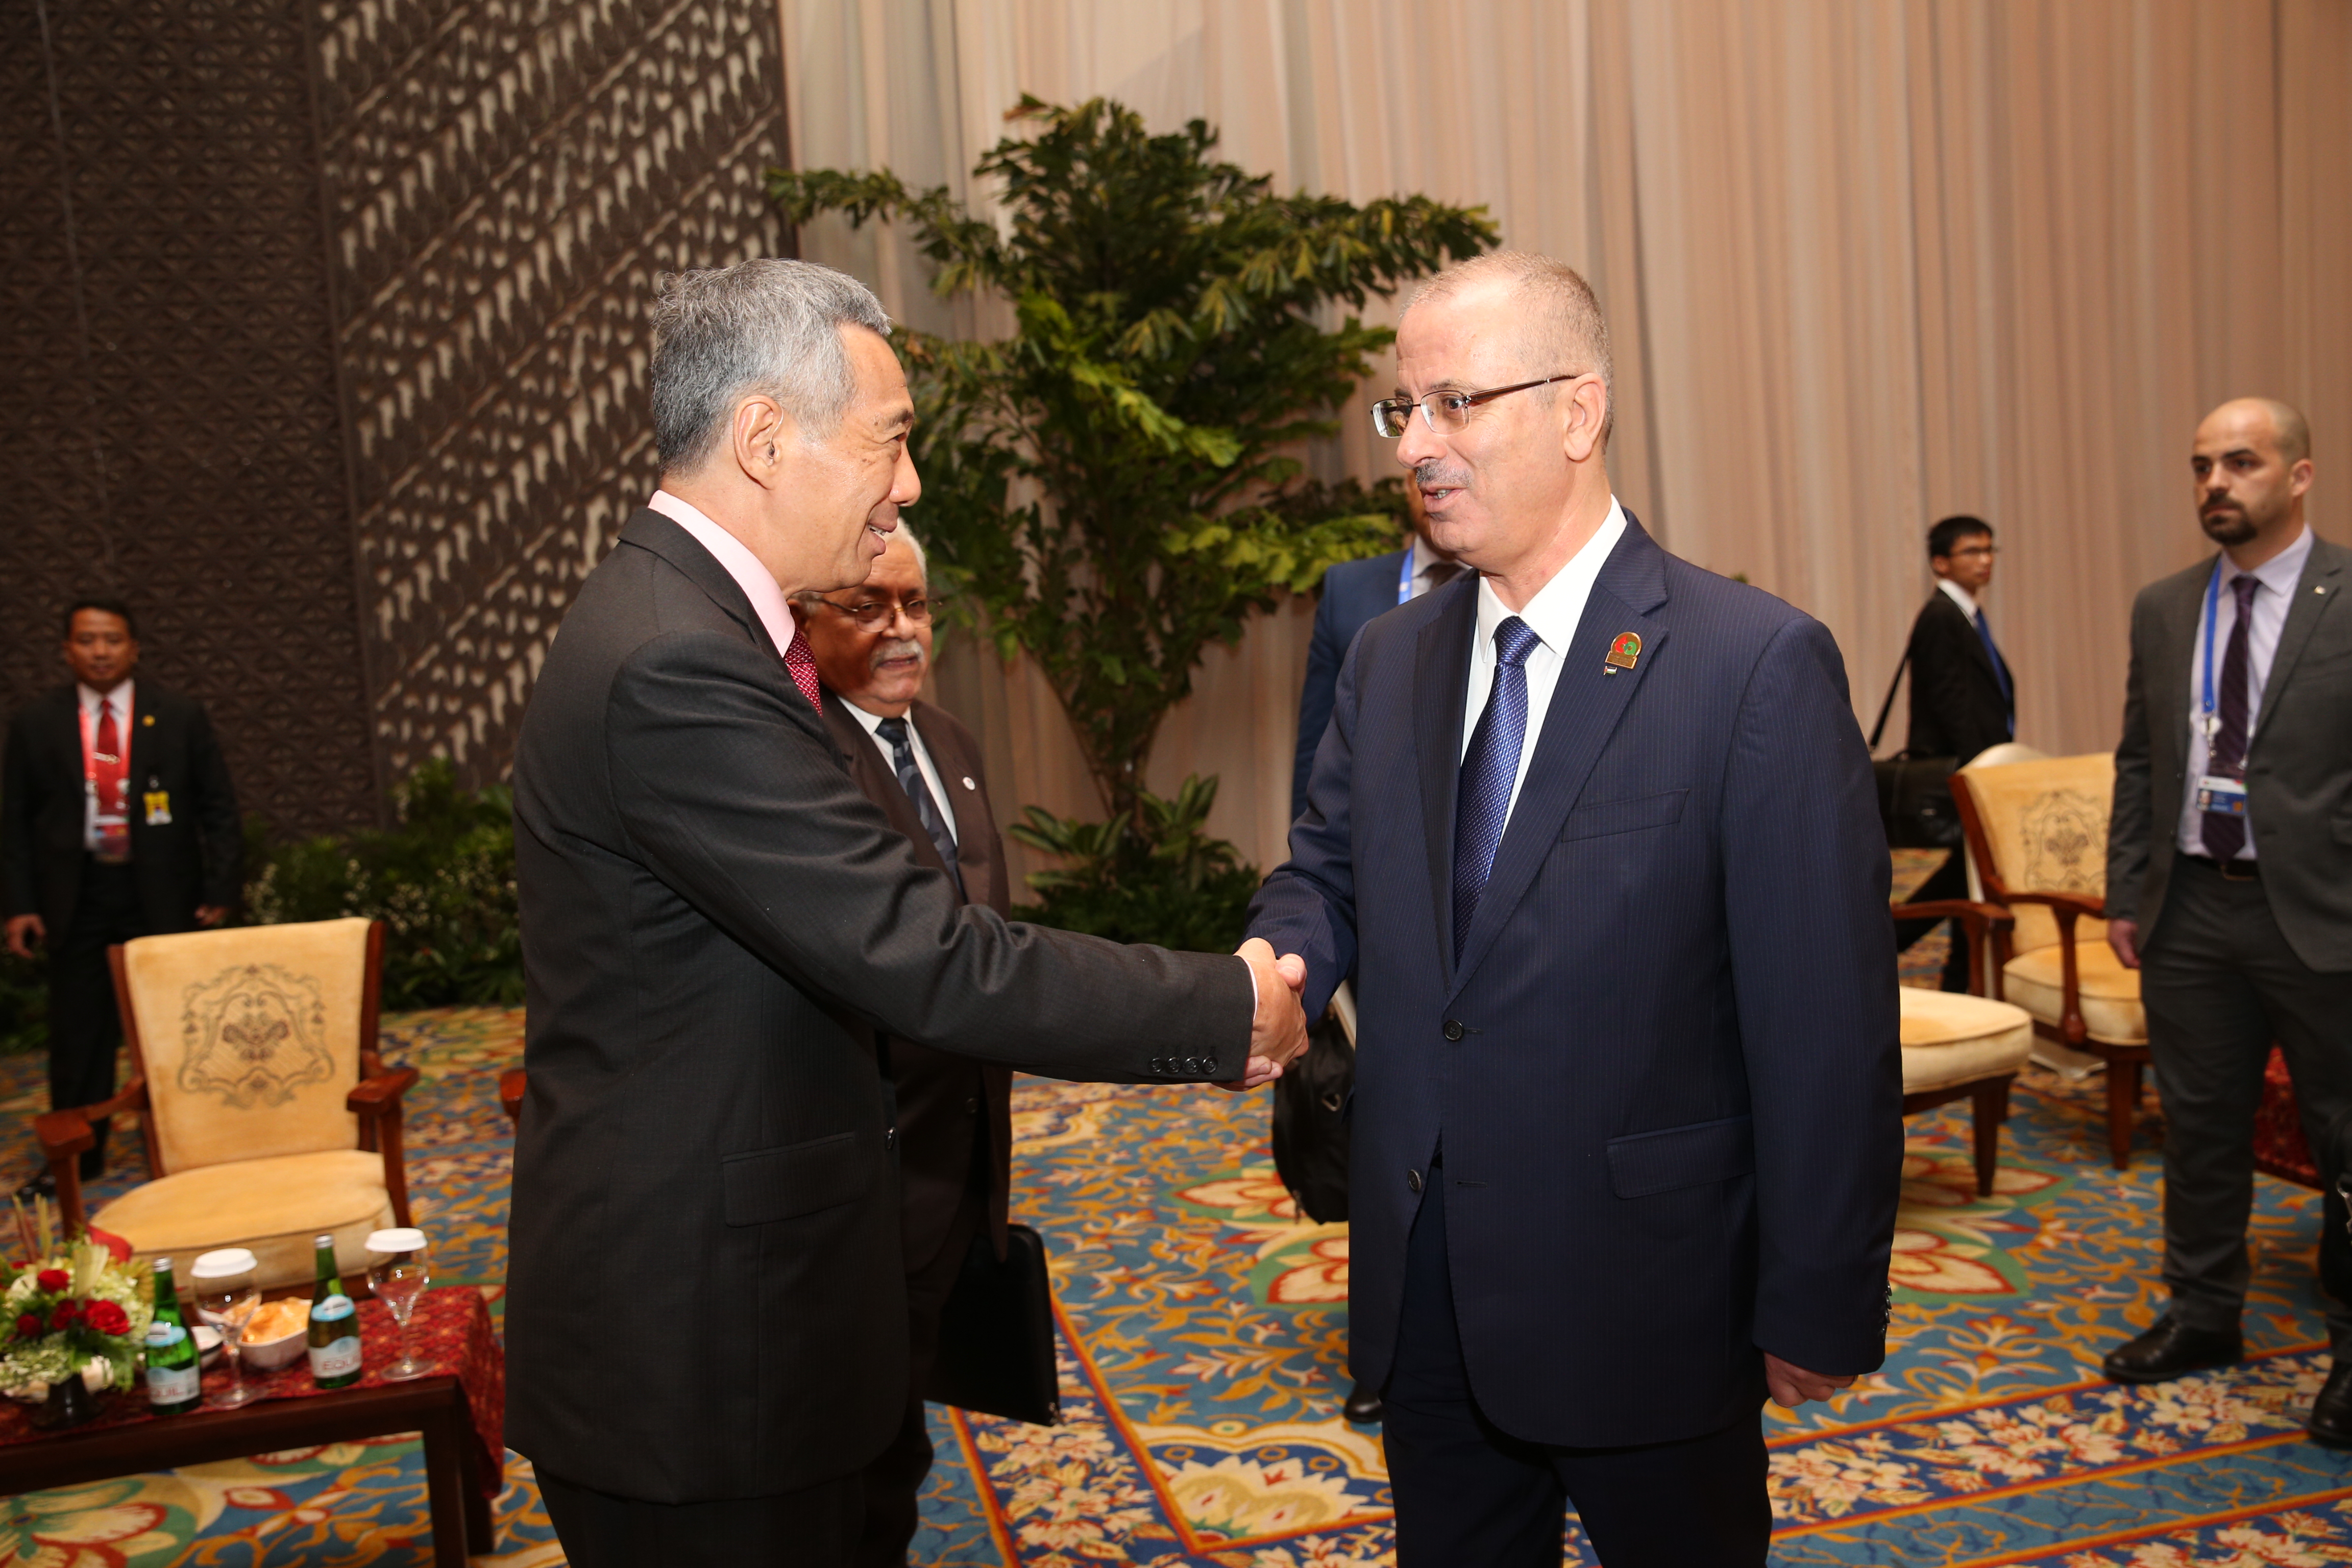 Prime Minister Lee Hsien Loong meeting Palestine Prime Minister Rami Hamdallah at the sidelines of the 2nd Asian-African Summit - Apr 2015 (MCI Photo by Terence Tan)